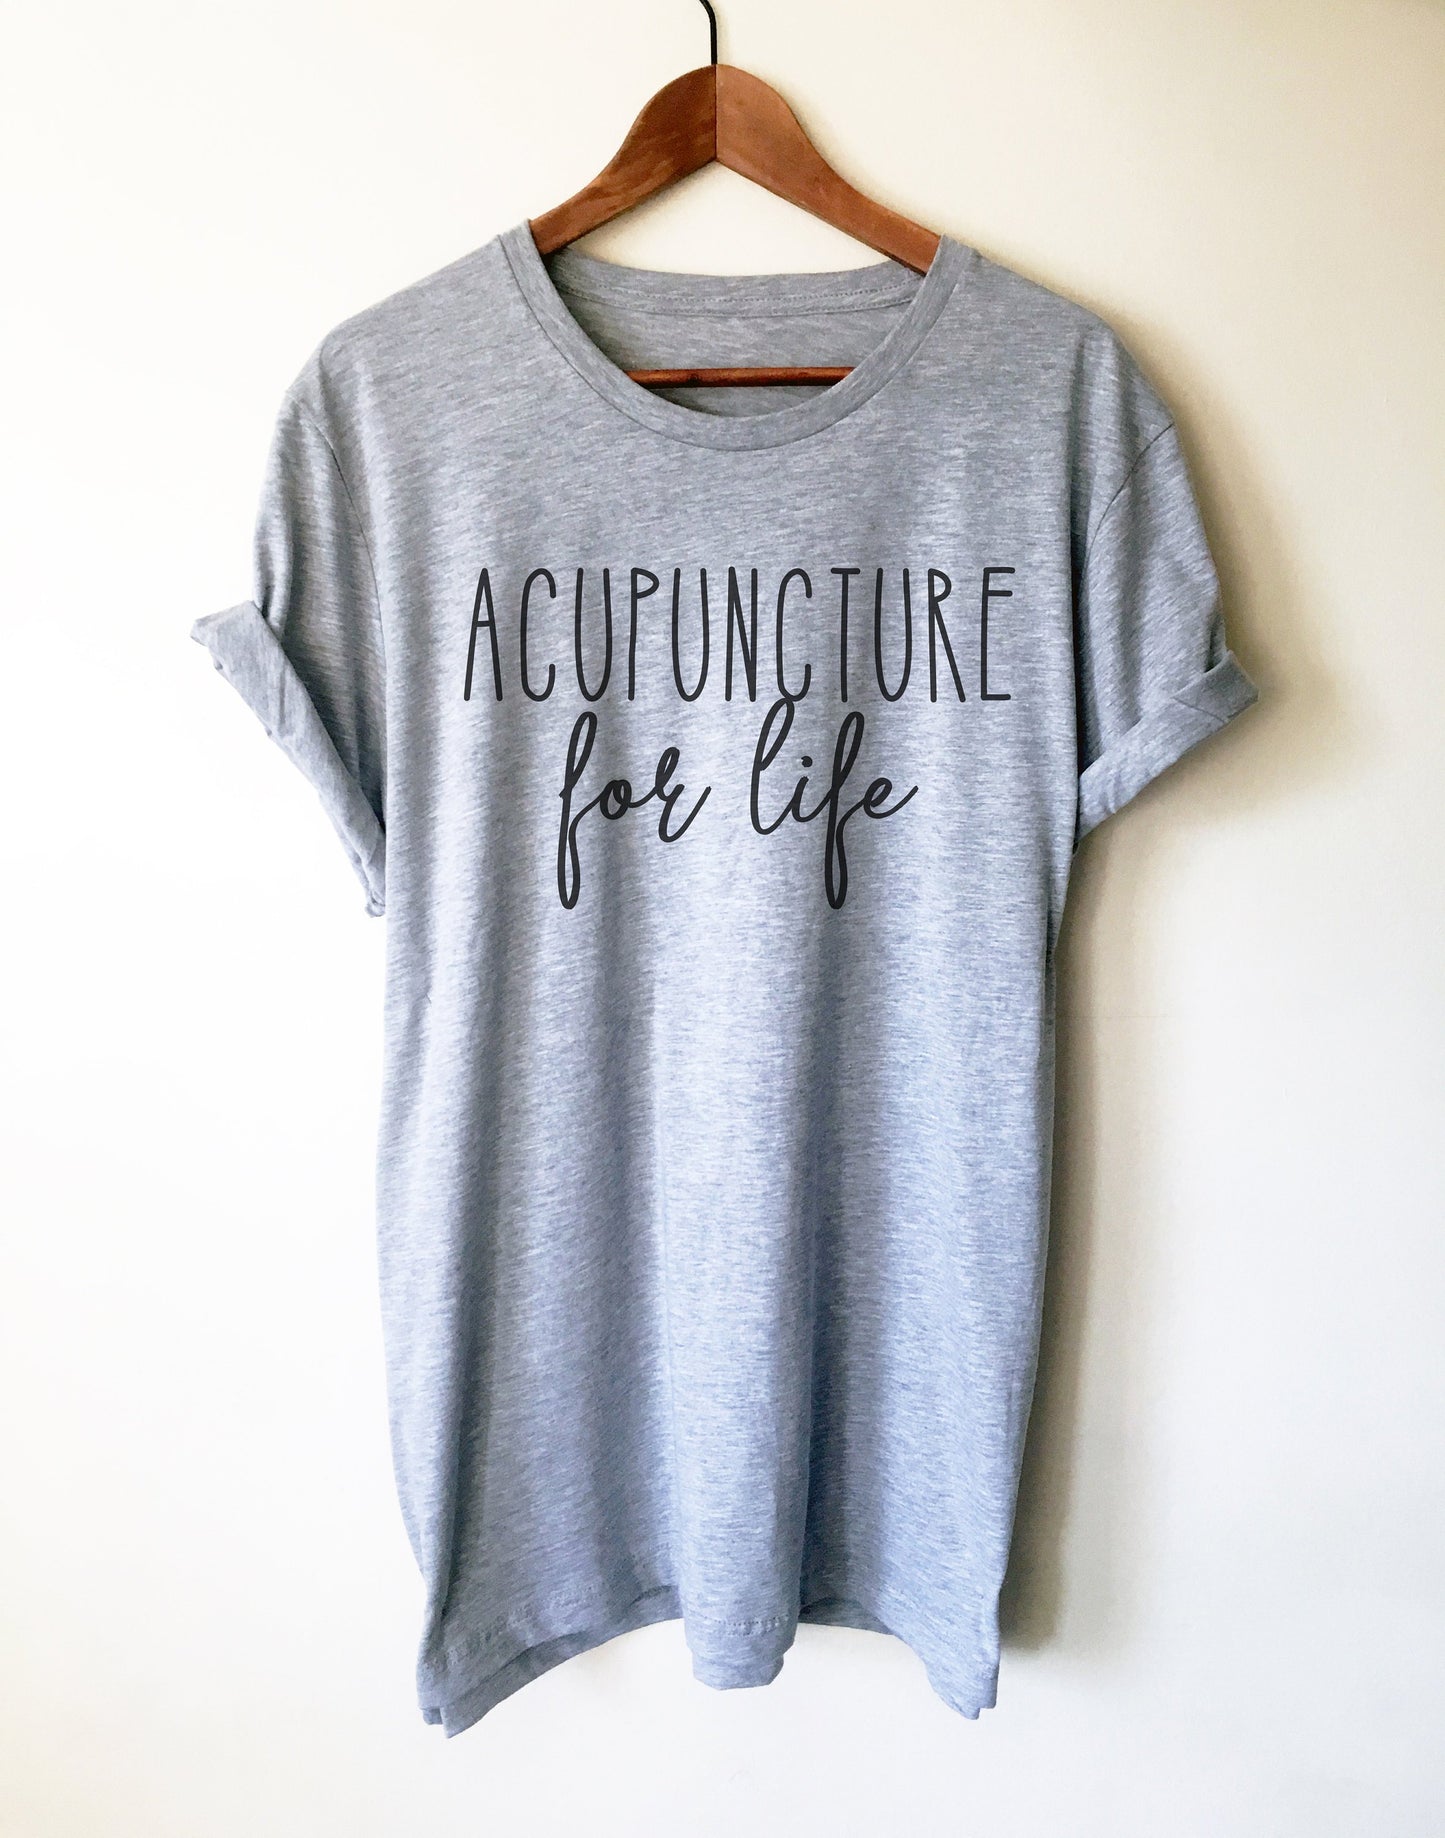 Acupuncture For Life Unisex Shirt